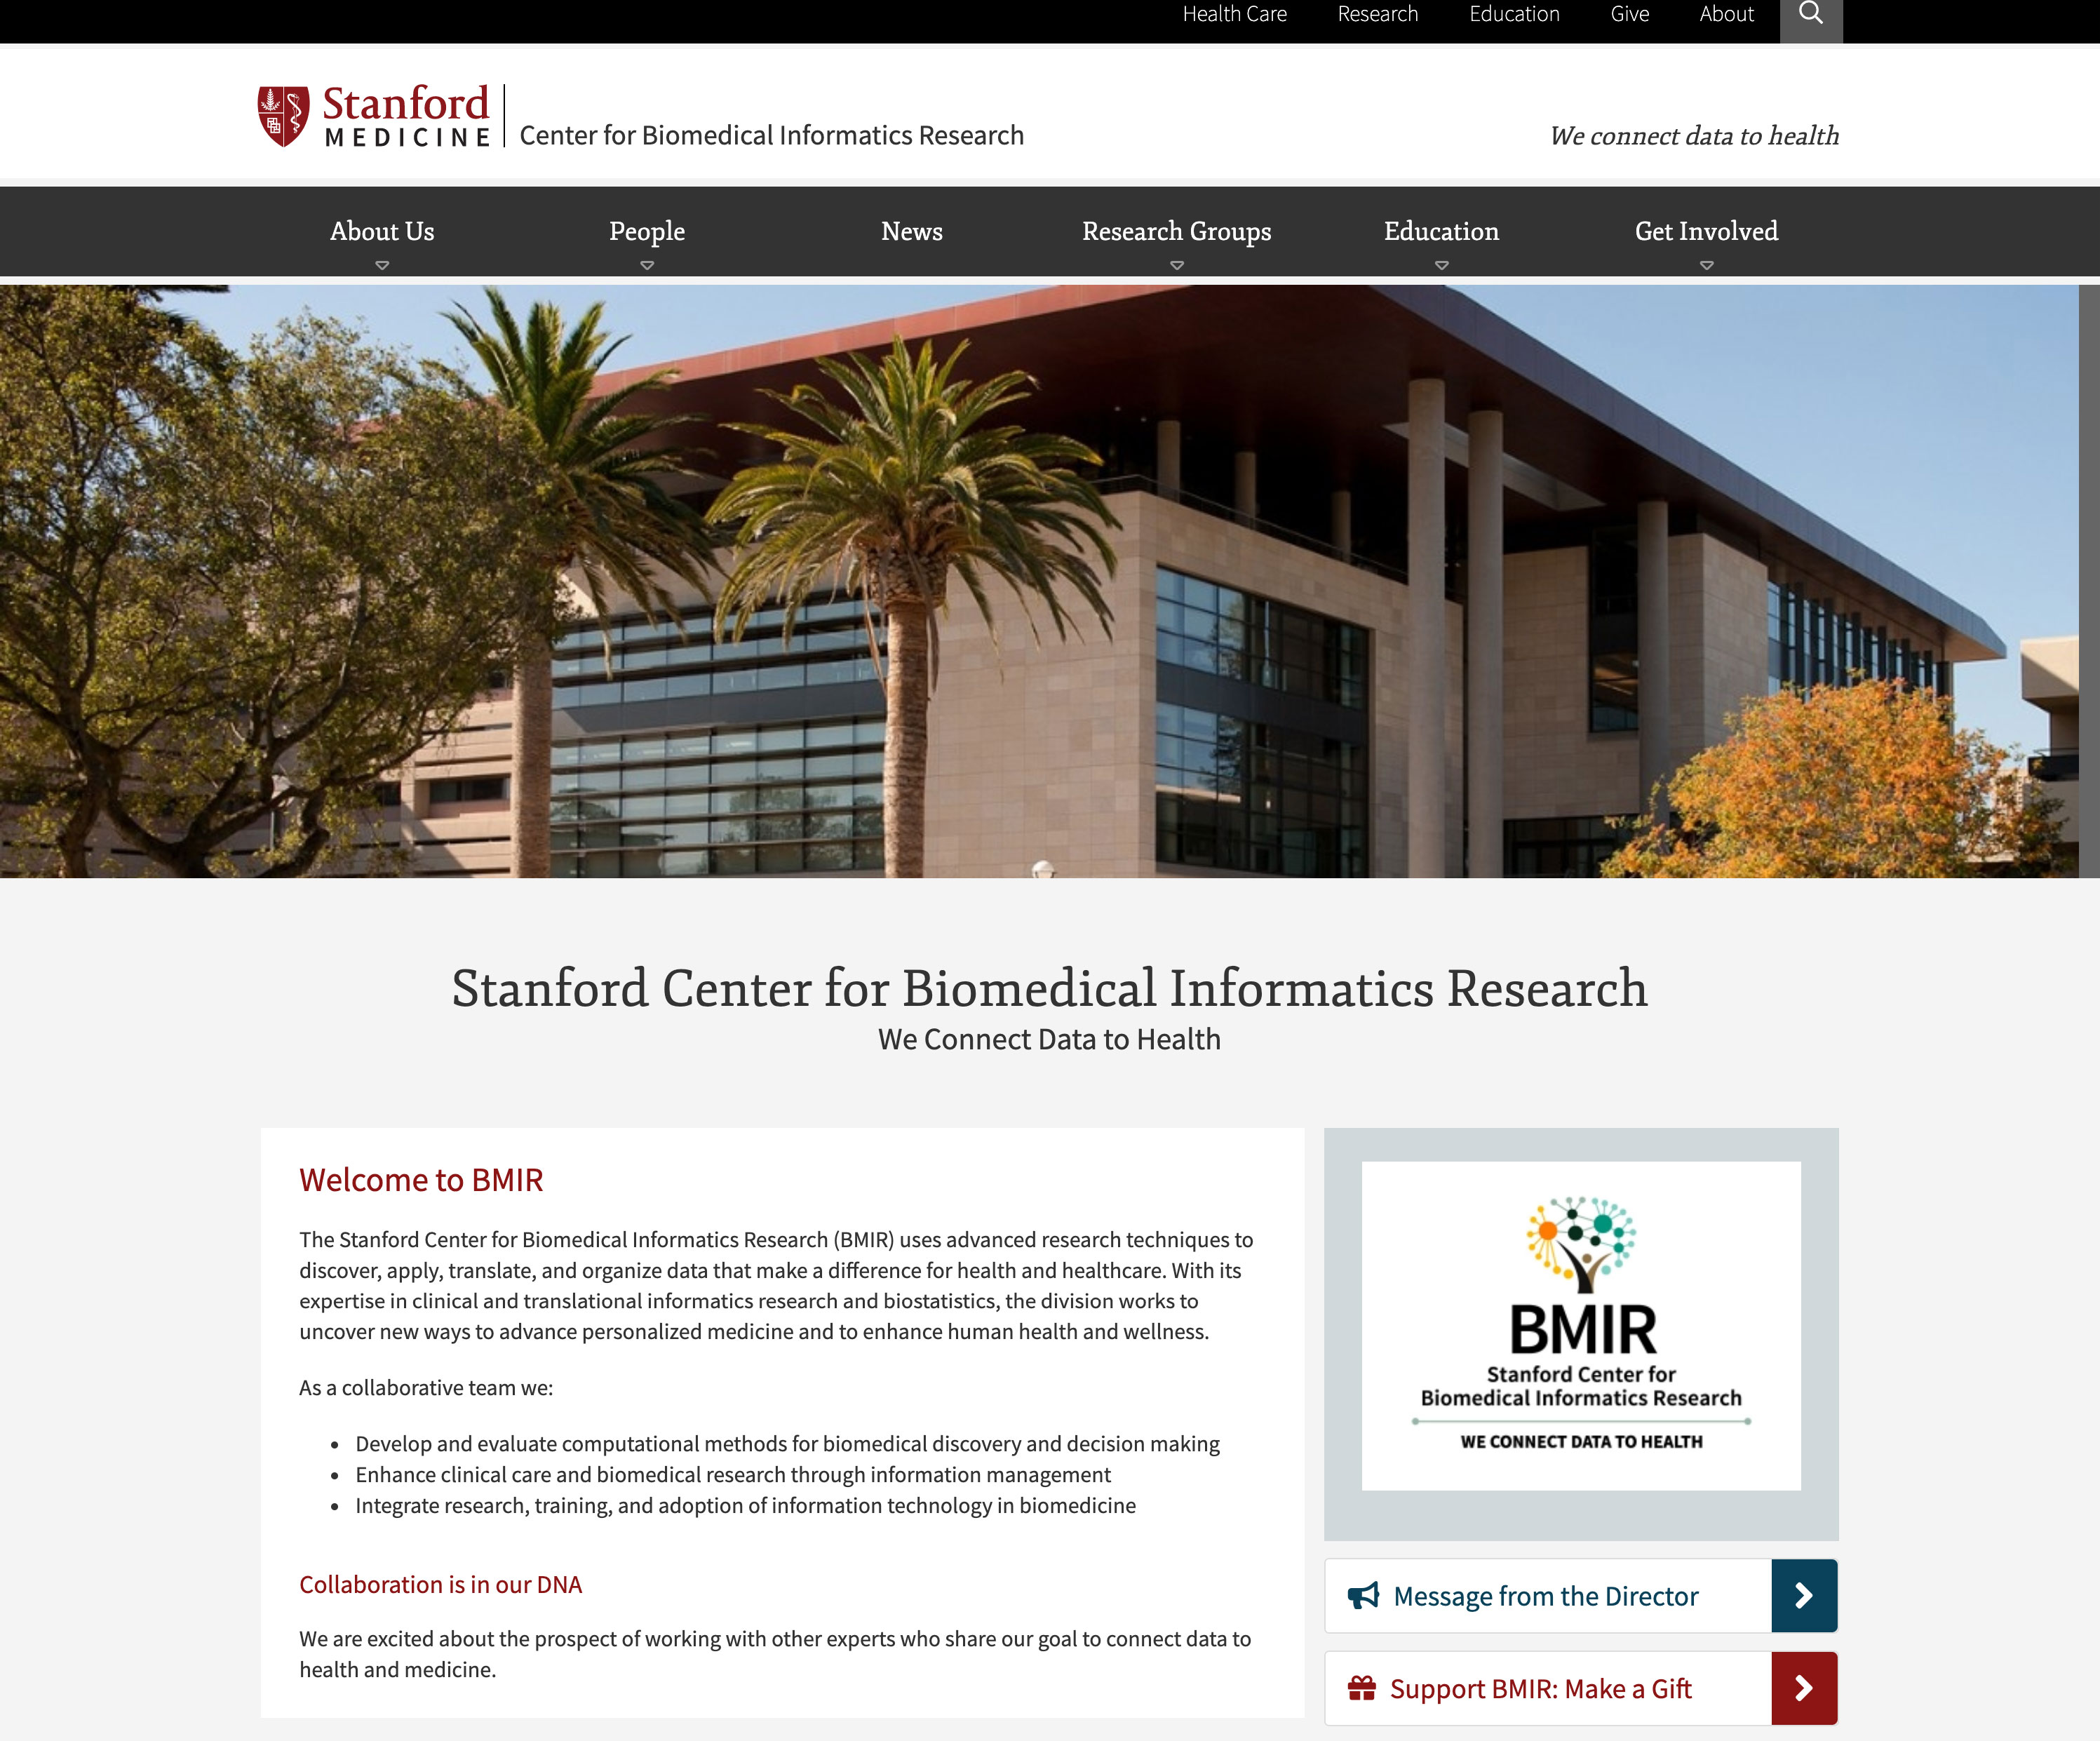 Stanford Center for Biomedical Informatics Research